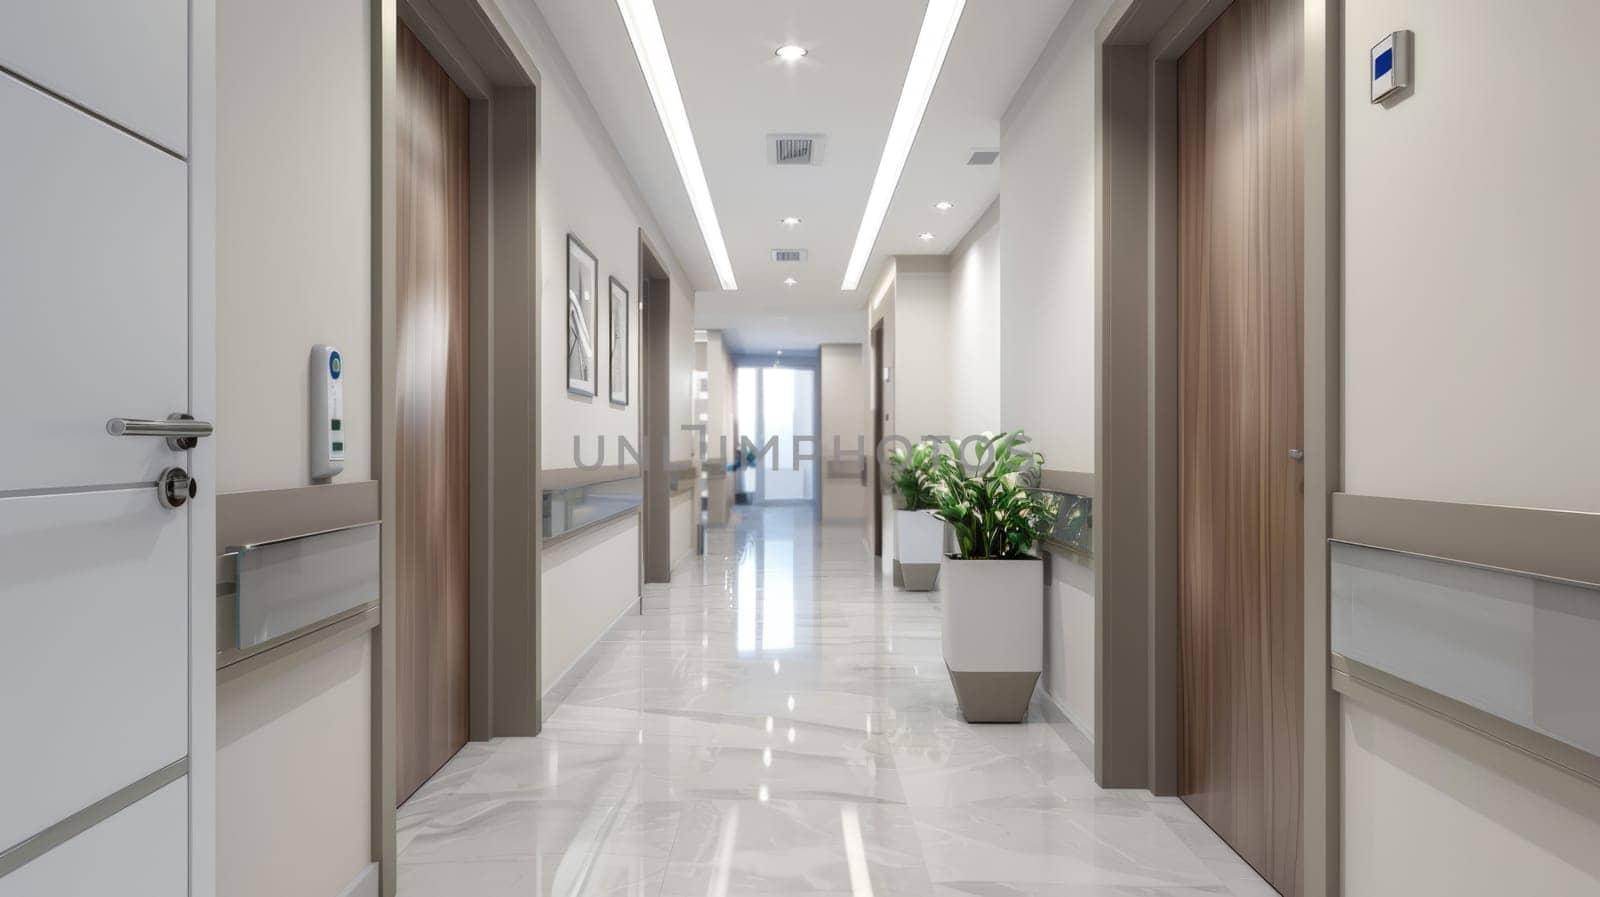 Hallway in a contemporary clinic with clean lines by natali_brill